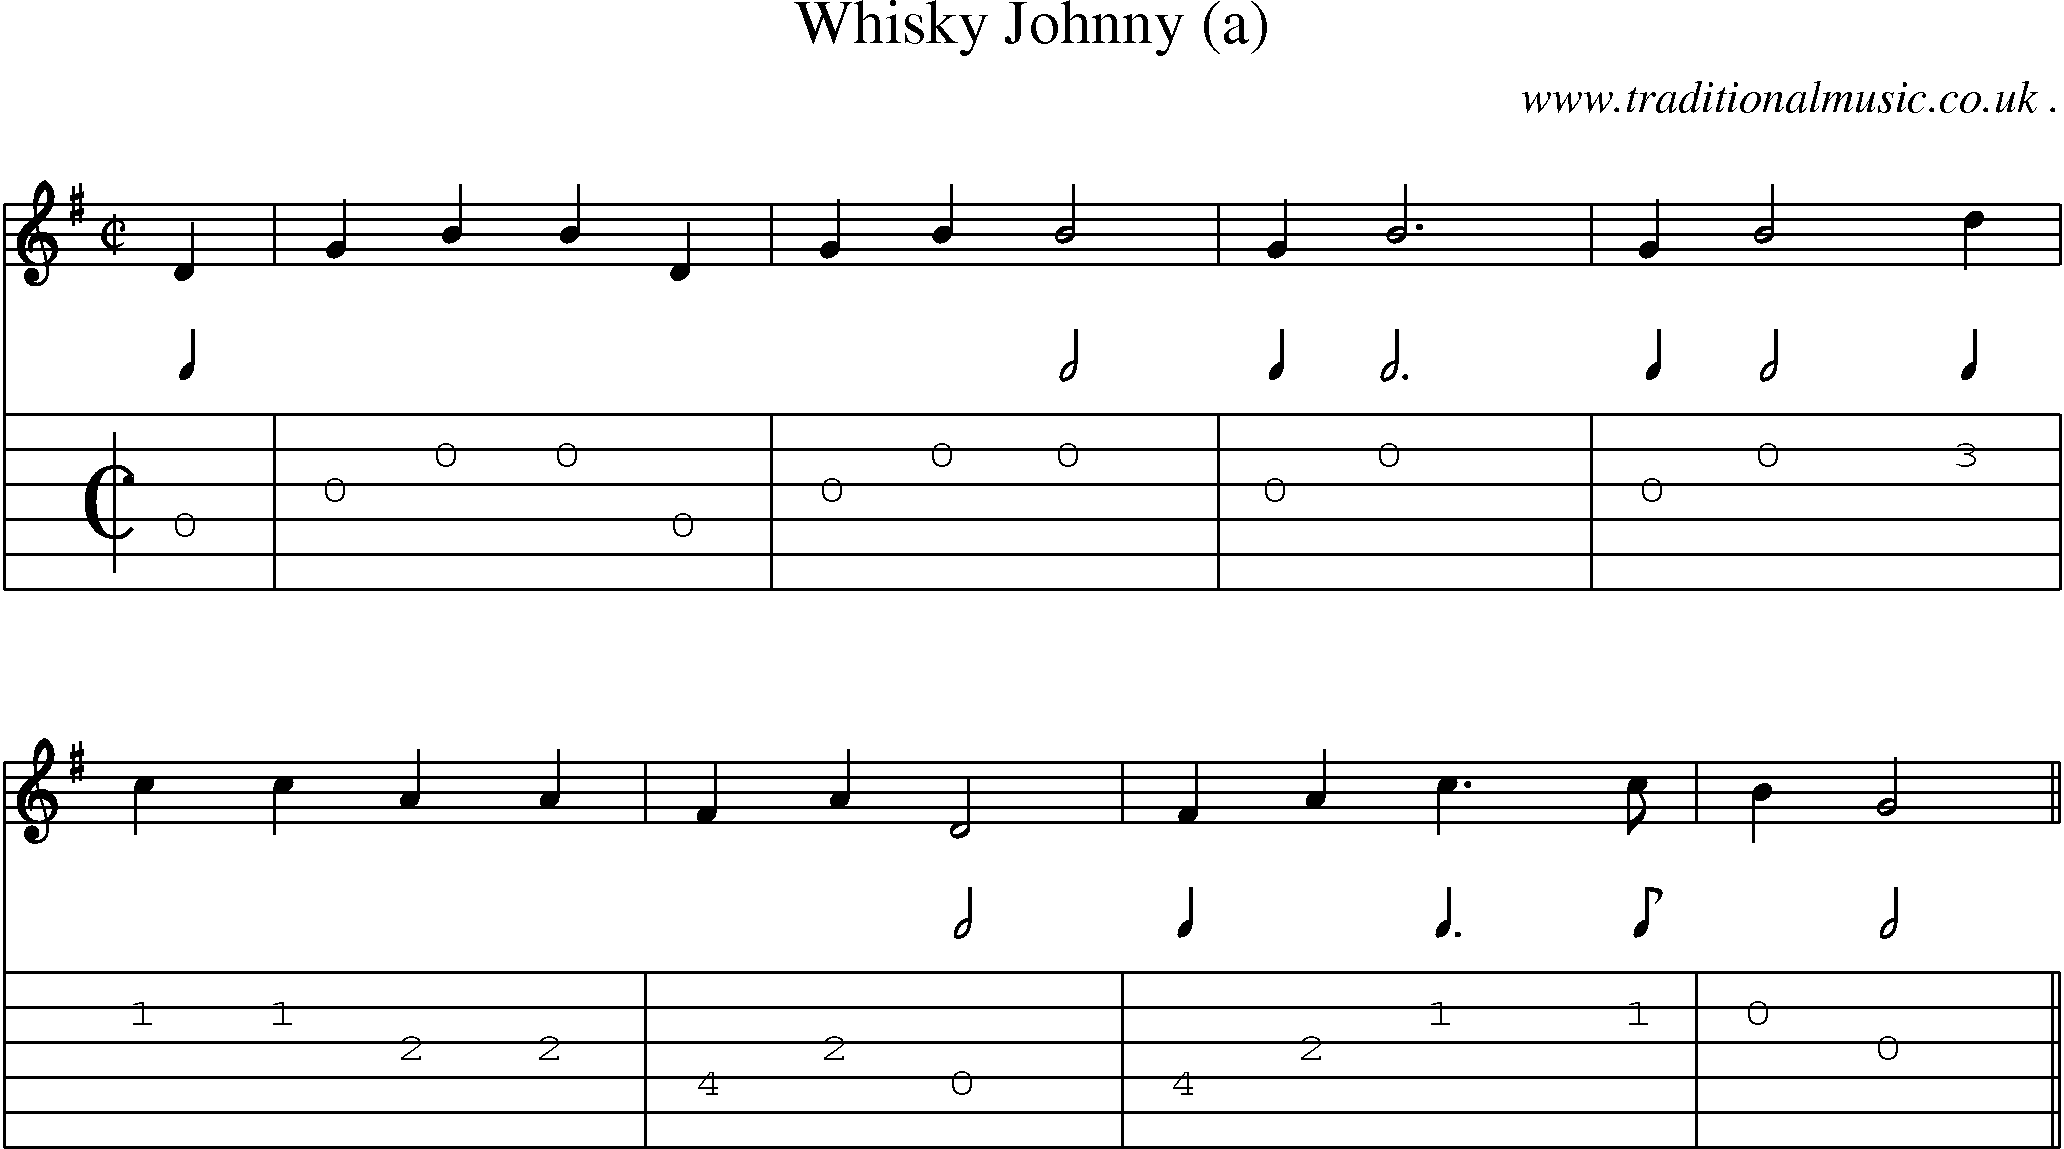 Sheet-Music and Guitar Tabs for Whisky Johnny (a)